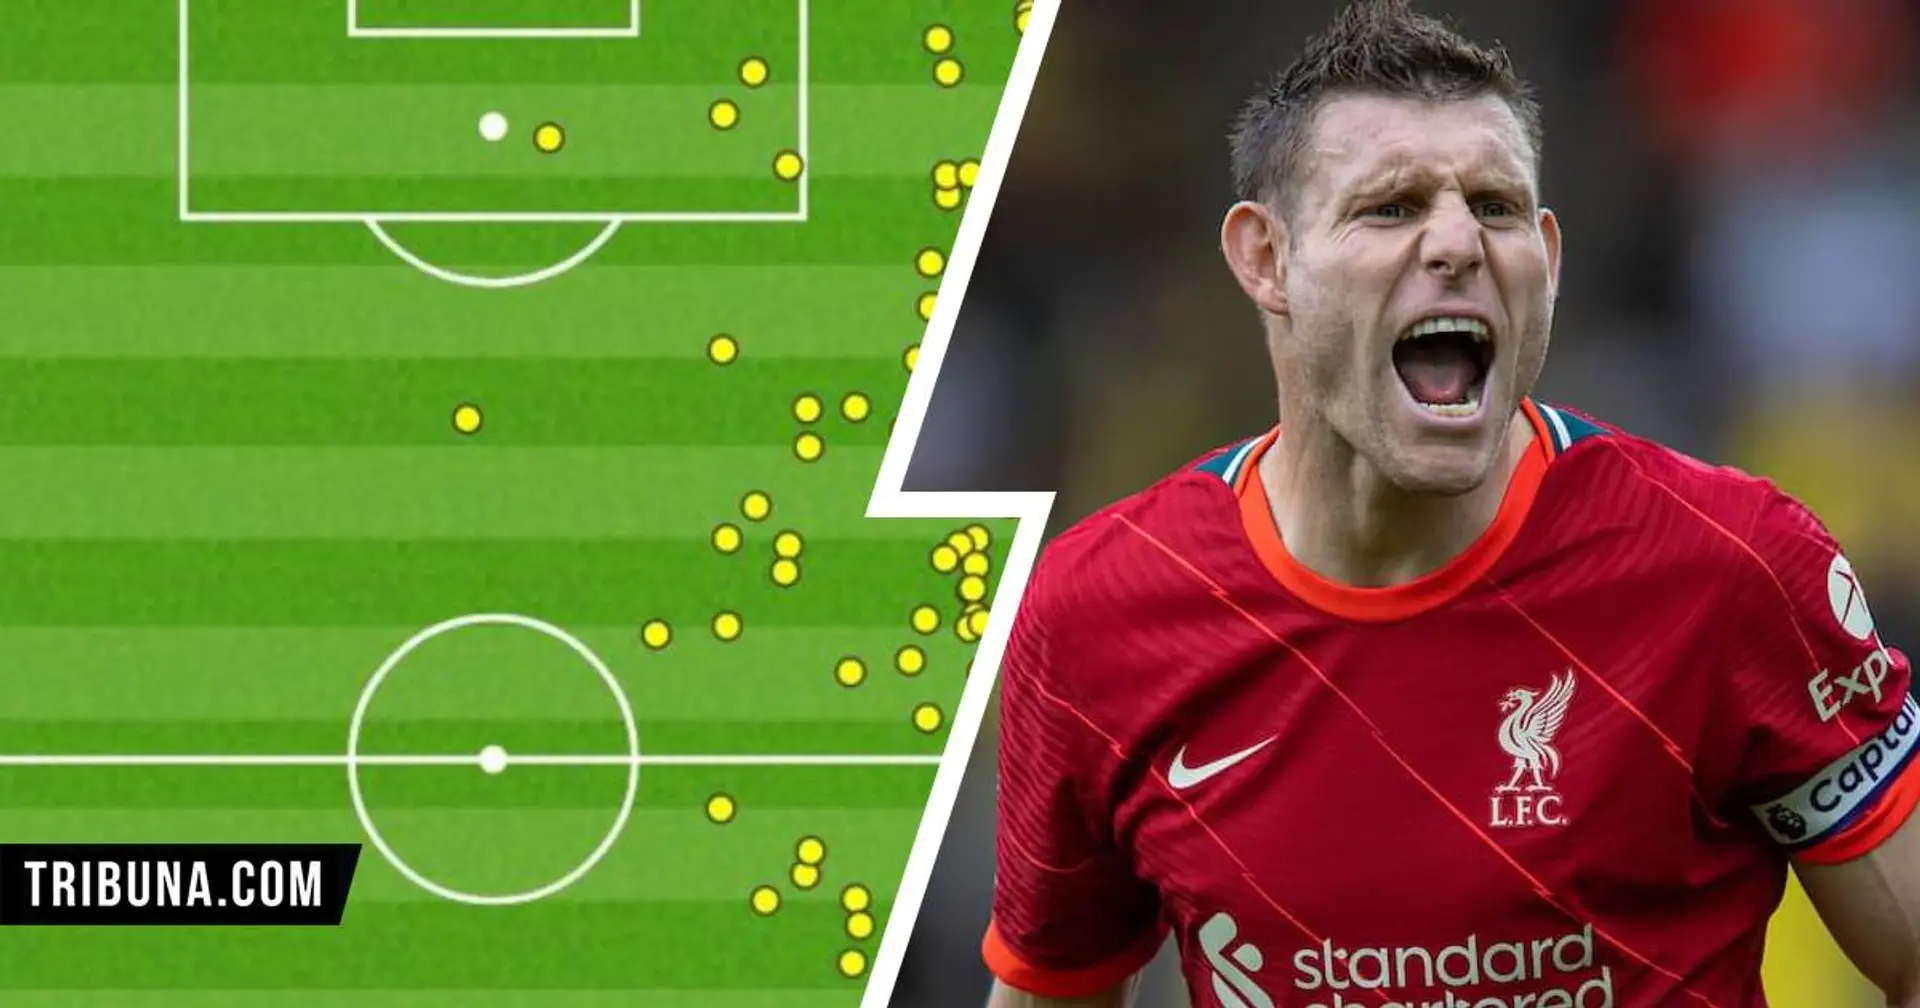 Most crosses, most tackles & more: Breaking down Milner's top performance at right-back in Palace win